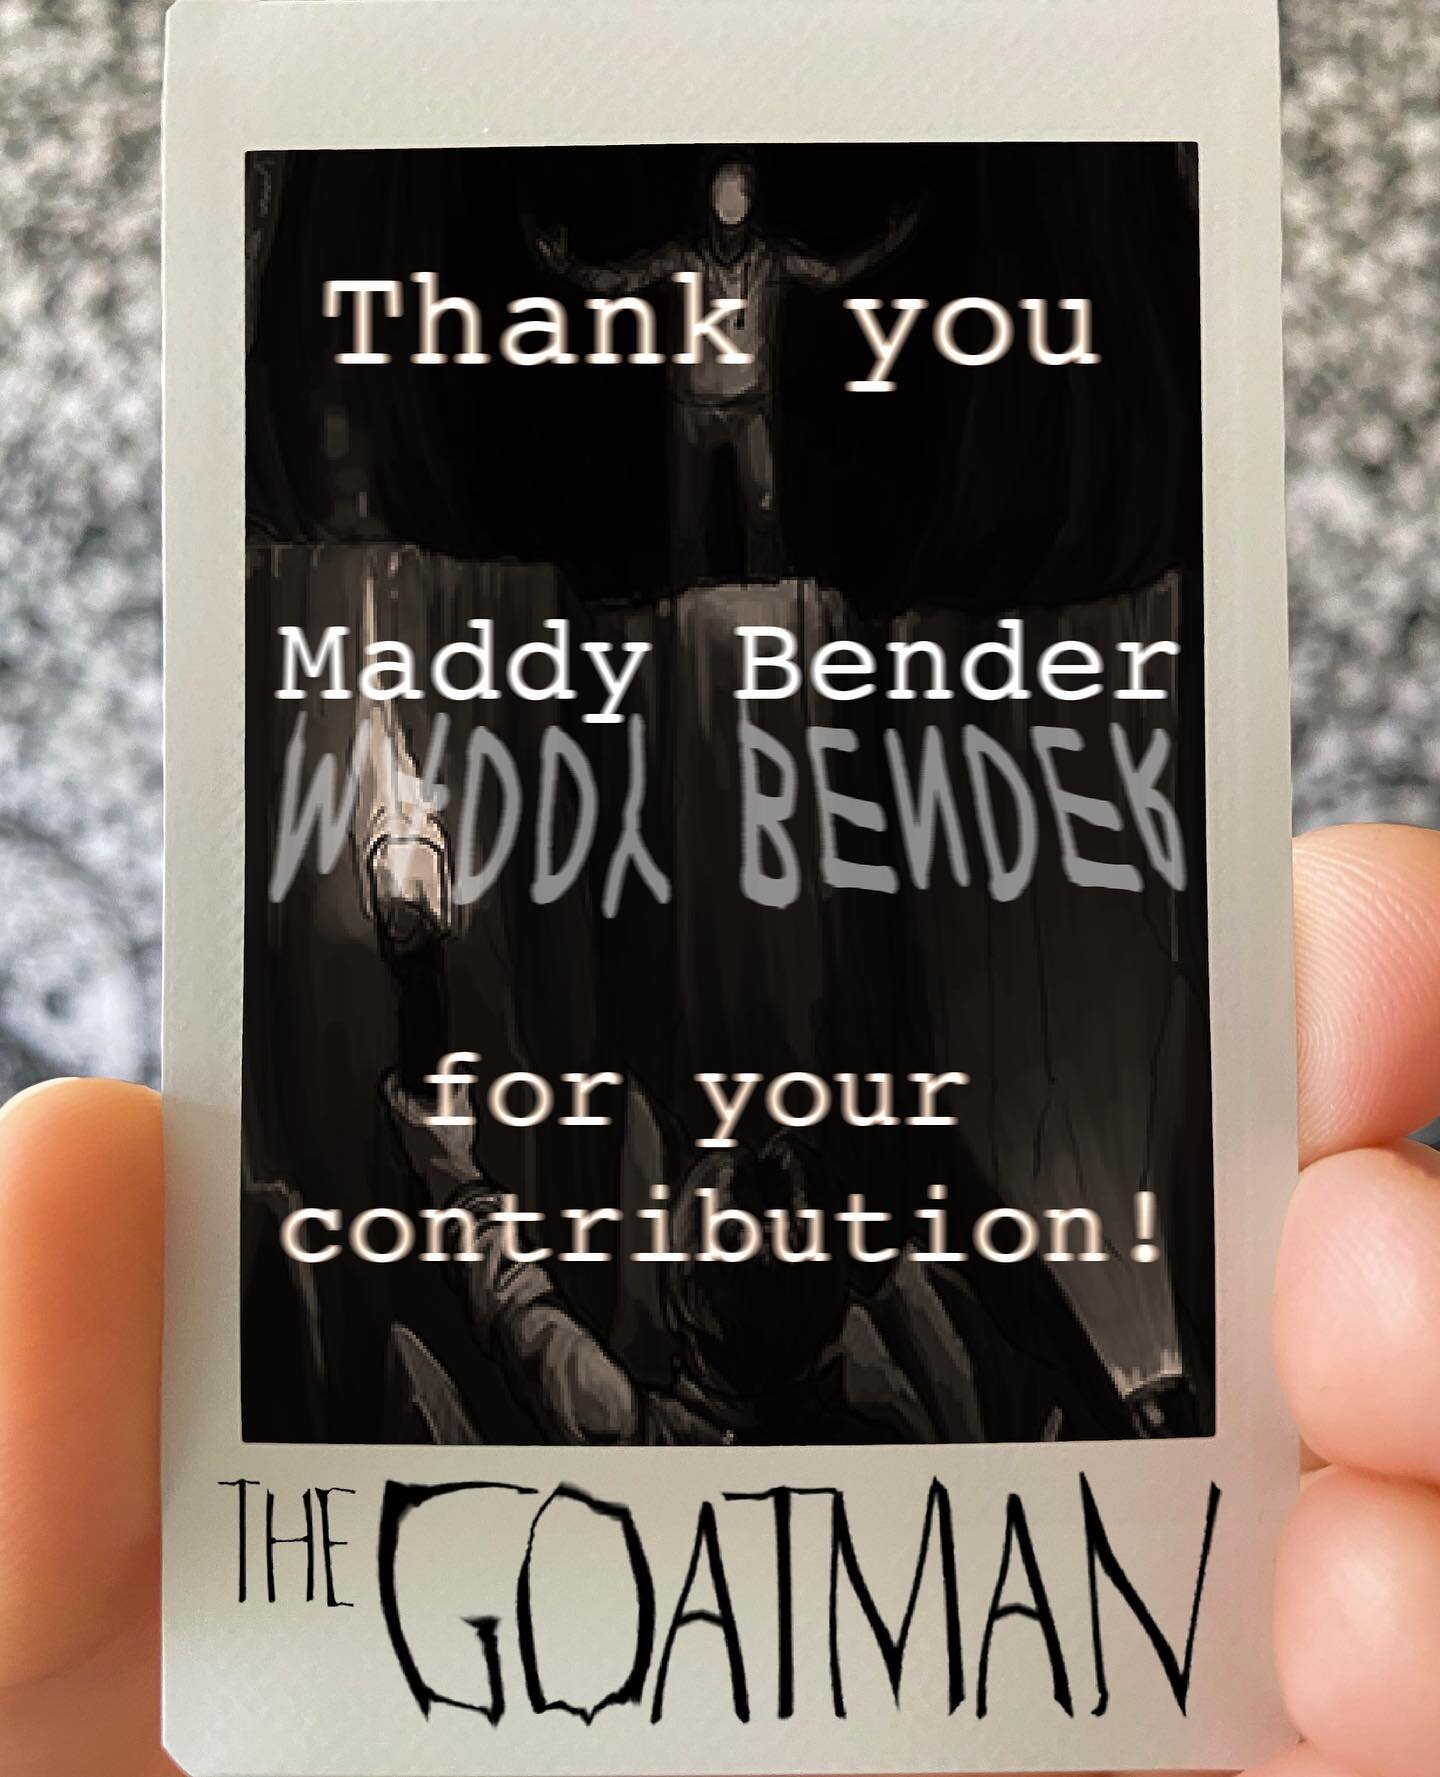 Shoutout to our friend Maddy for contributing to our project and joining #teamgoat on thegoatmanmovie.com 🐐 

Each contribution makes a huge difference and we can&rsquo;t thank you enough 💖

#indiehorror #indiehorrorfilm #horror #horrormovies #crow